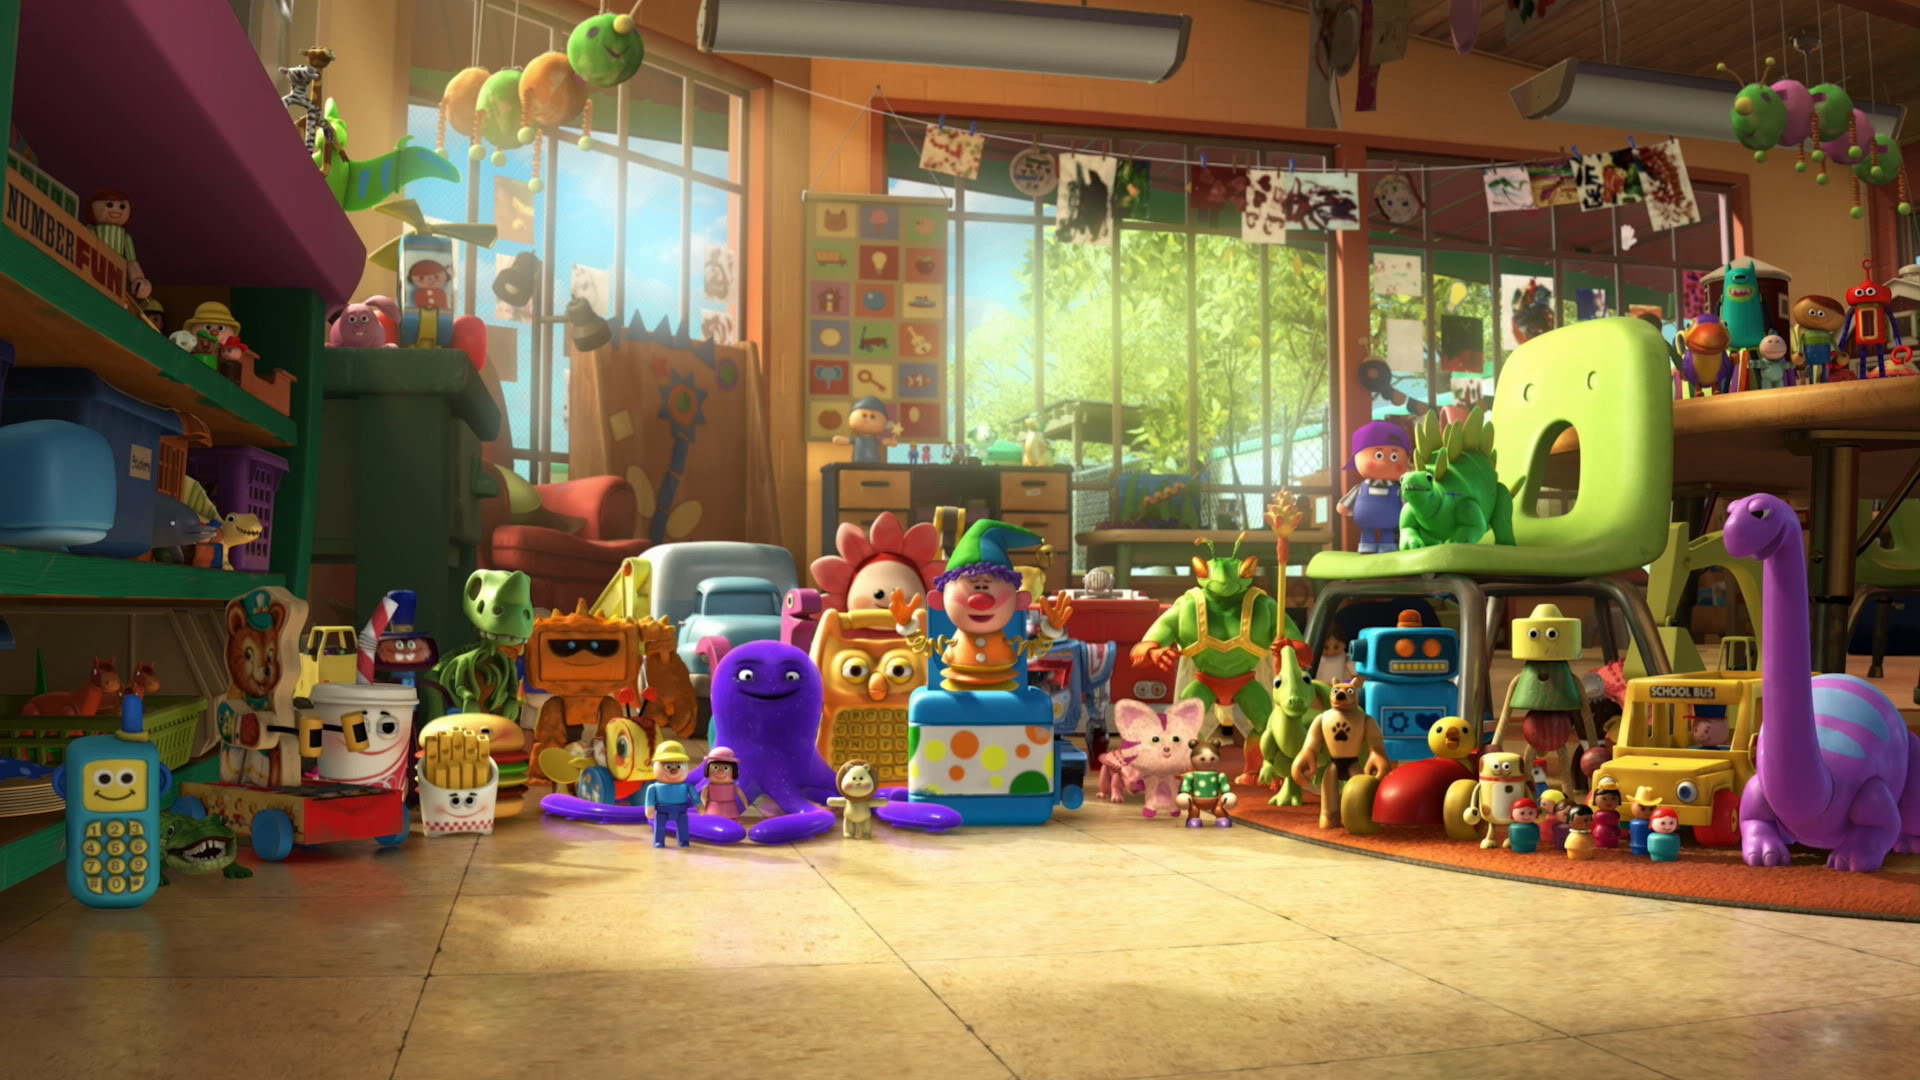 Free HD movie, toy story 3, toy story